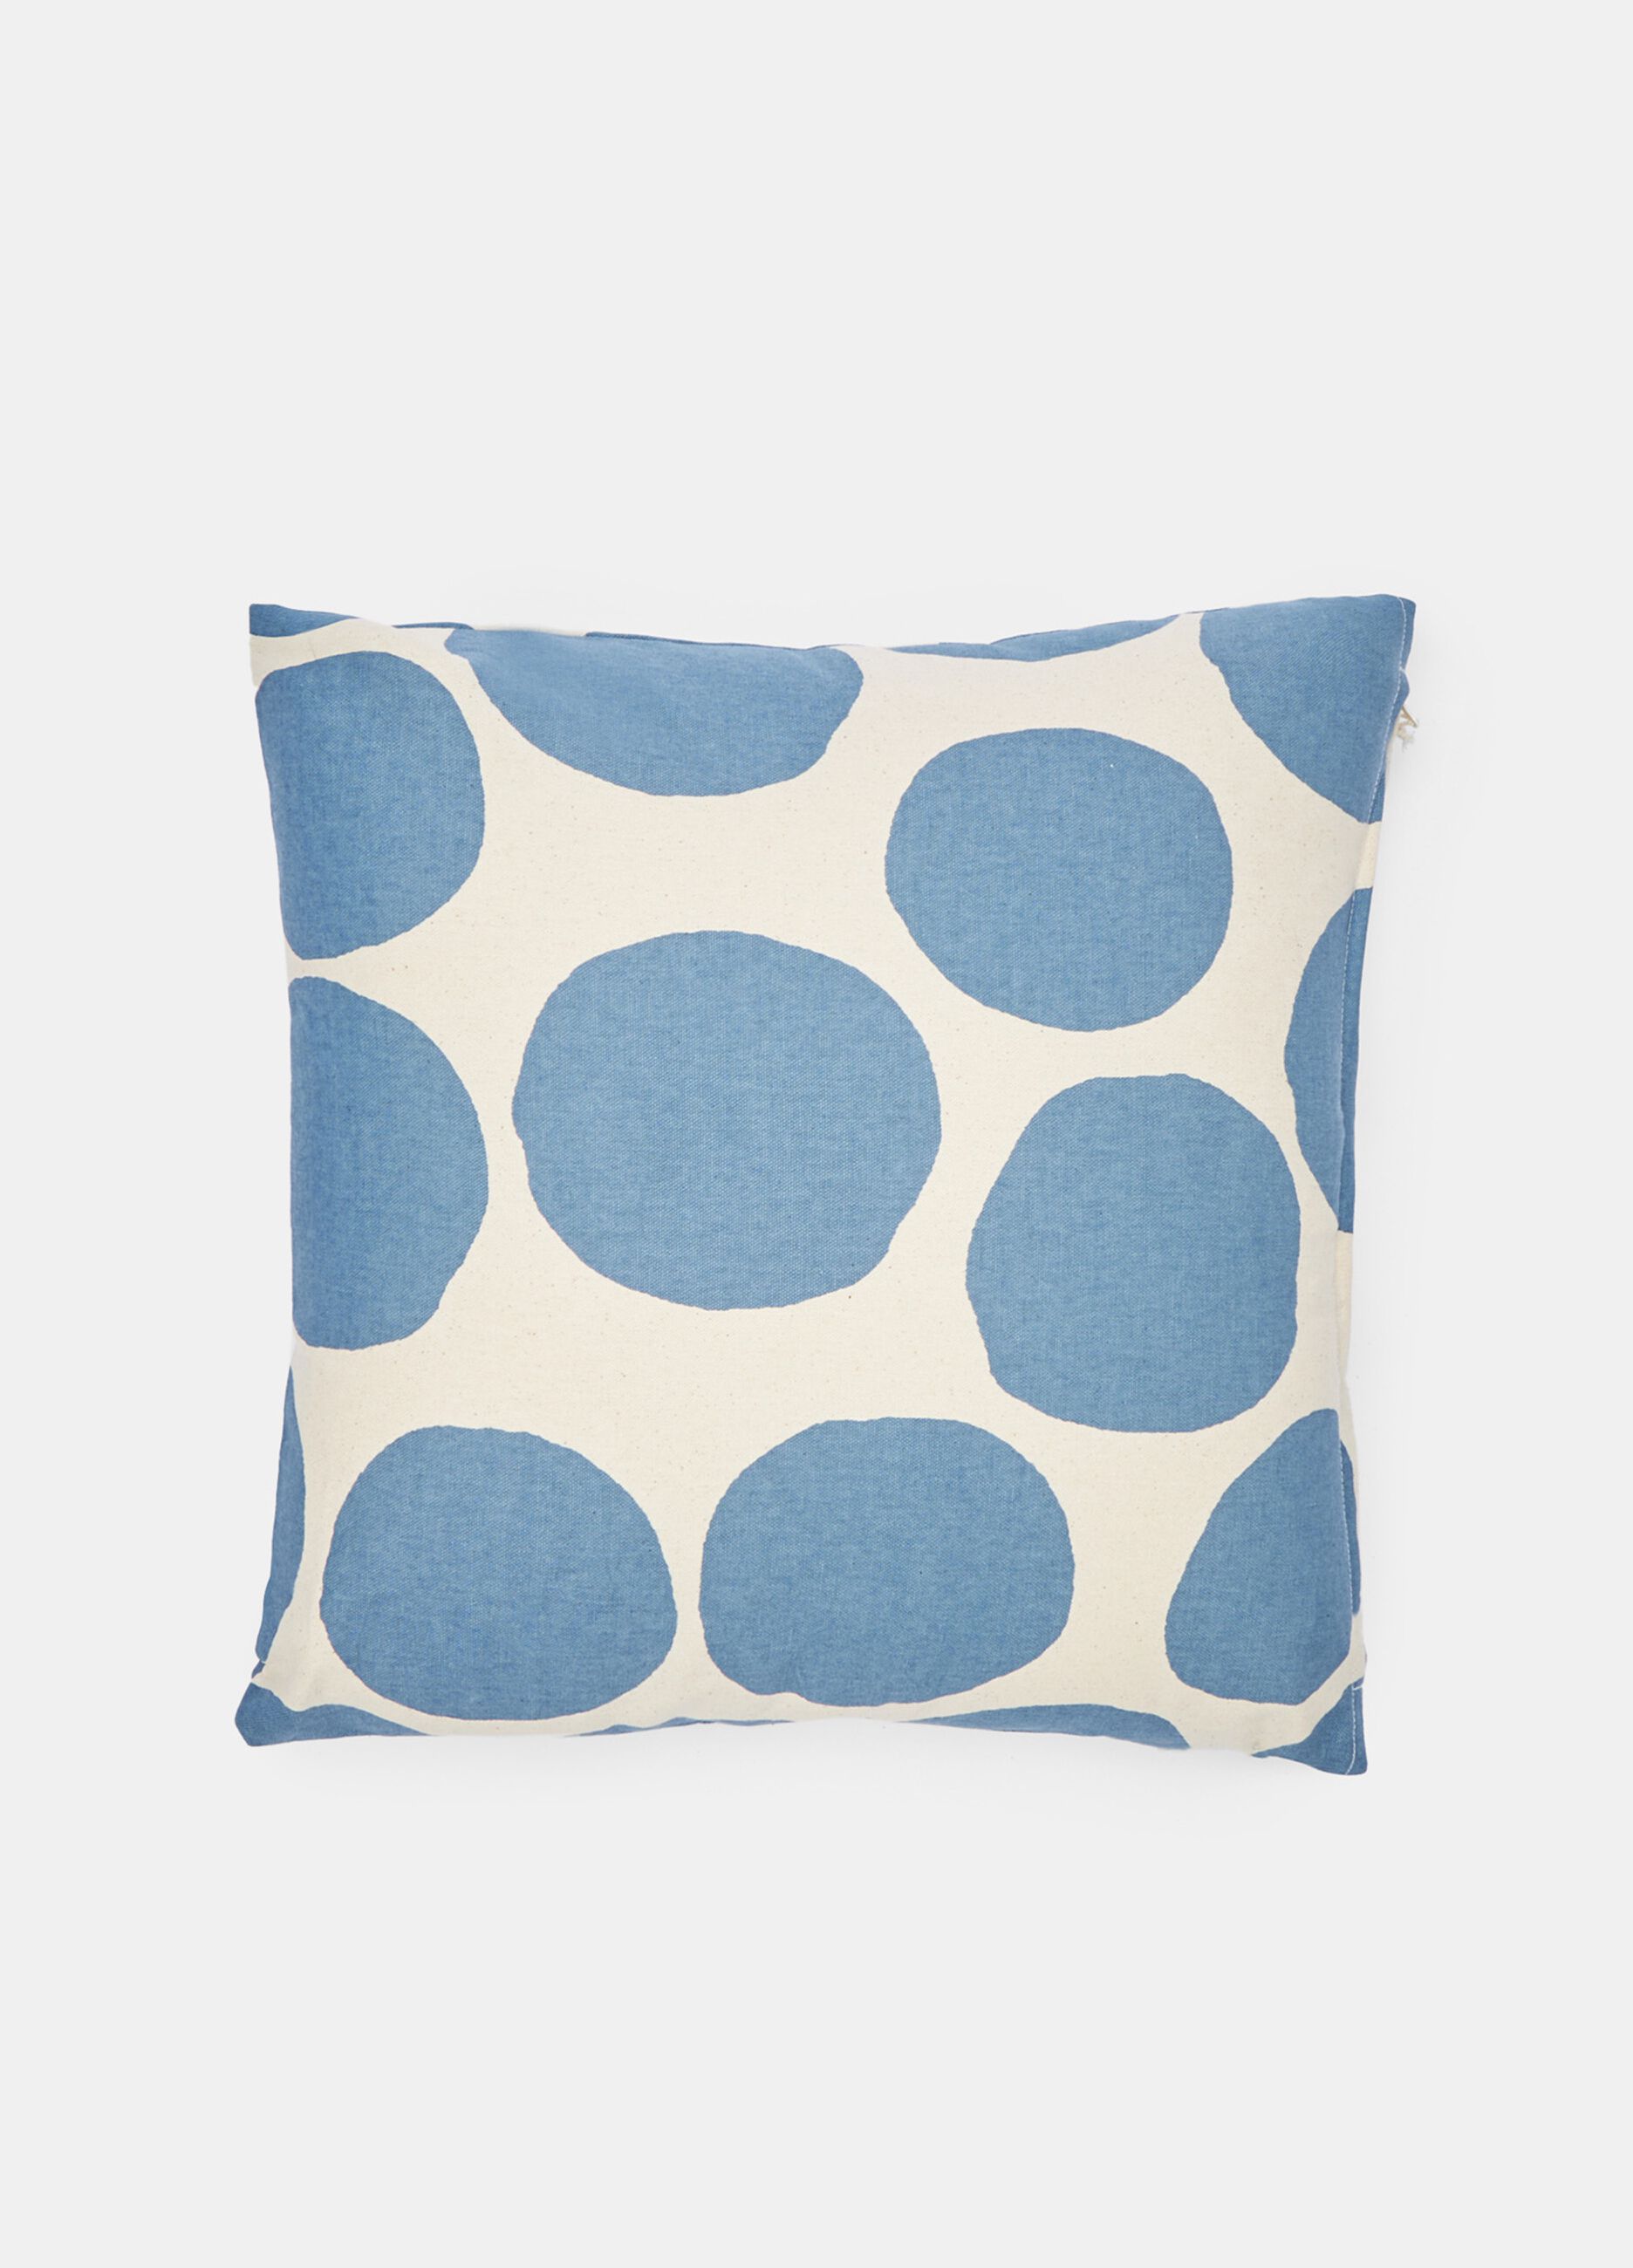 Polka dot cushion with cotton cover